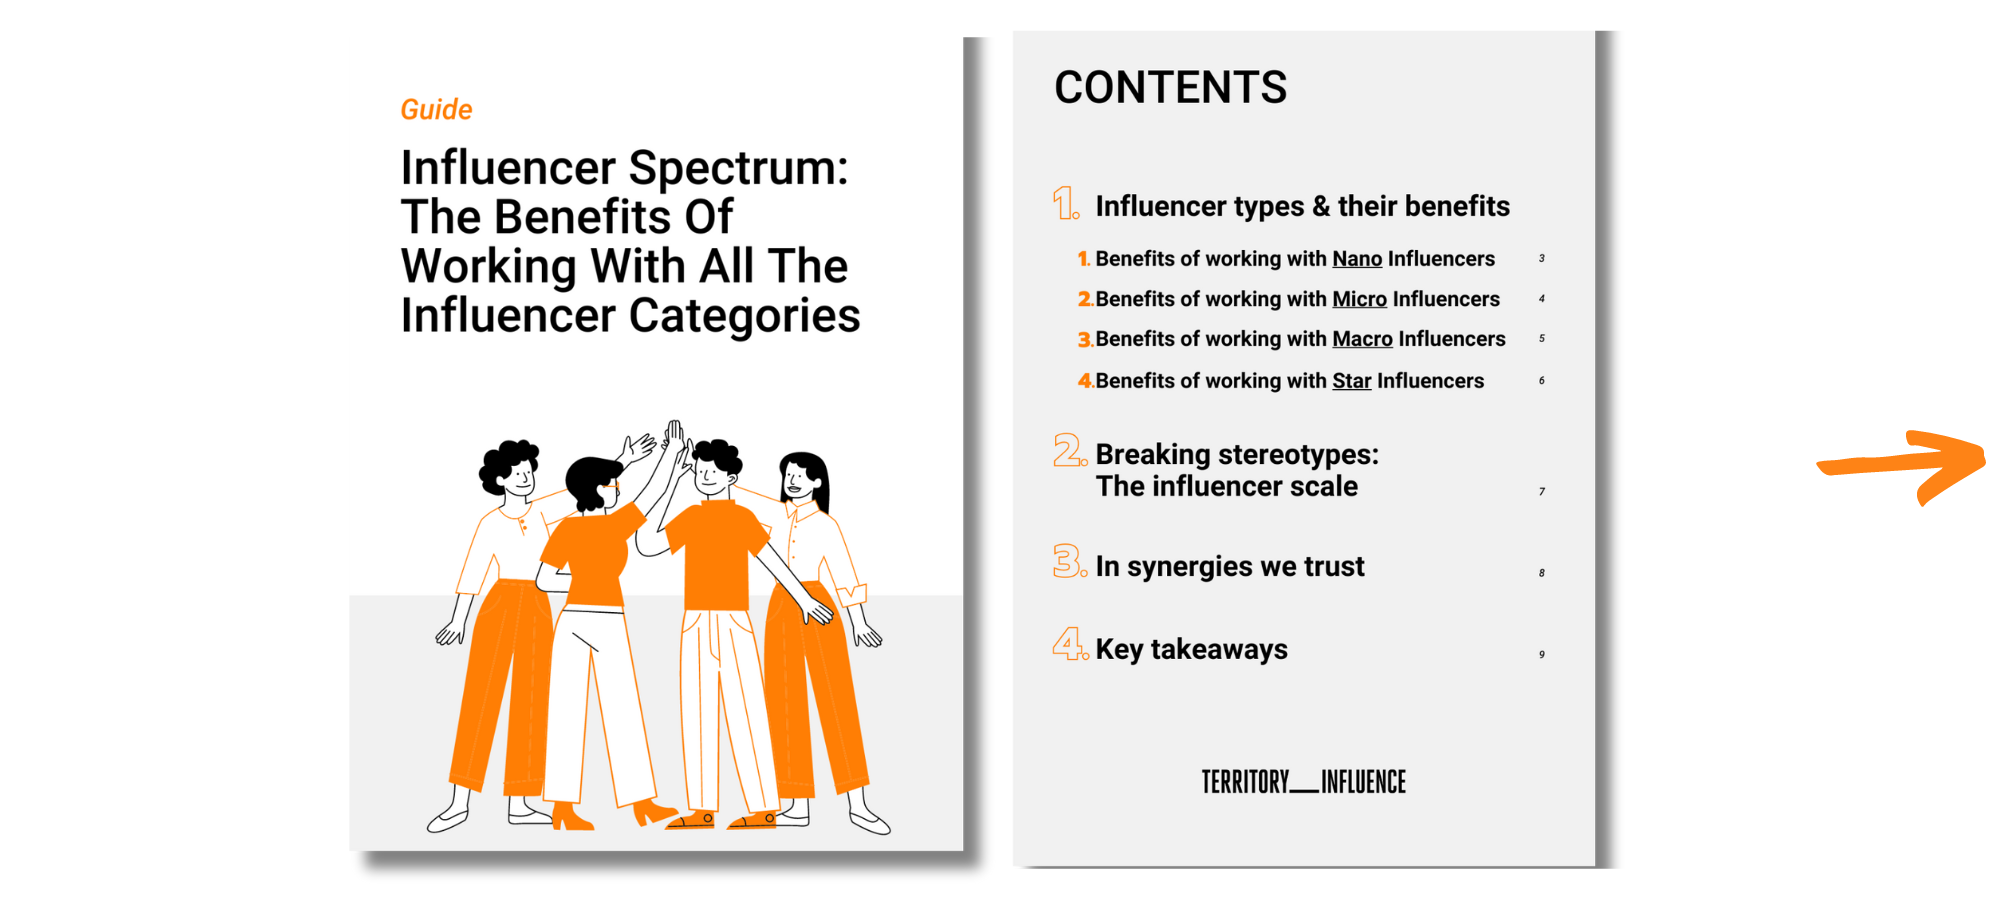 Guide: The Benefits Of Working With All The Influencer Categories